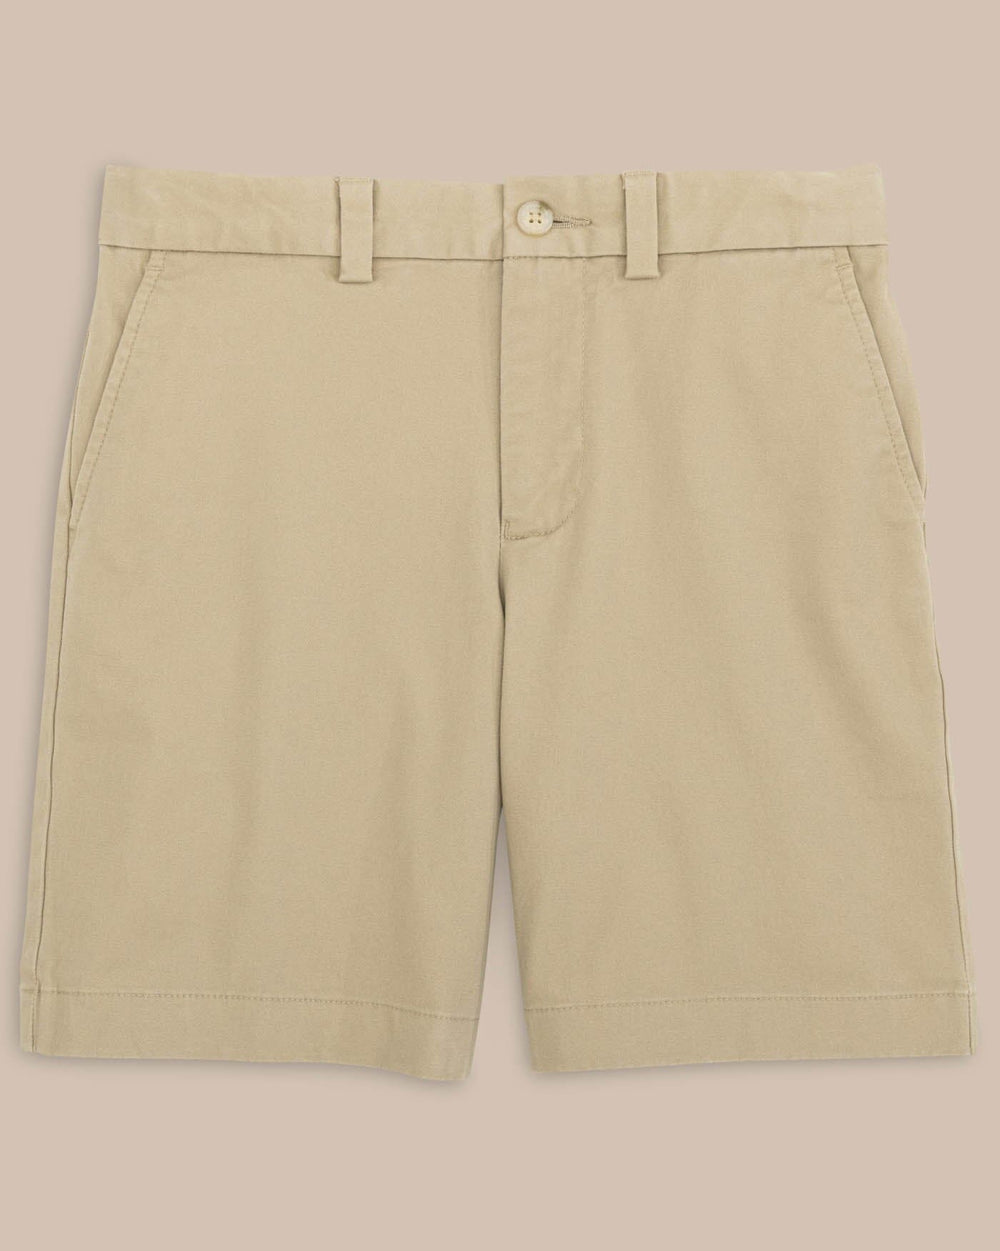 The front view of the Boys Channel Marker Short by Southern Tide - Sandstone Khaki